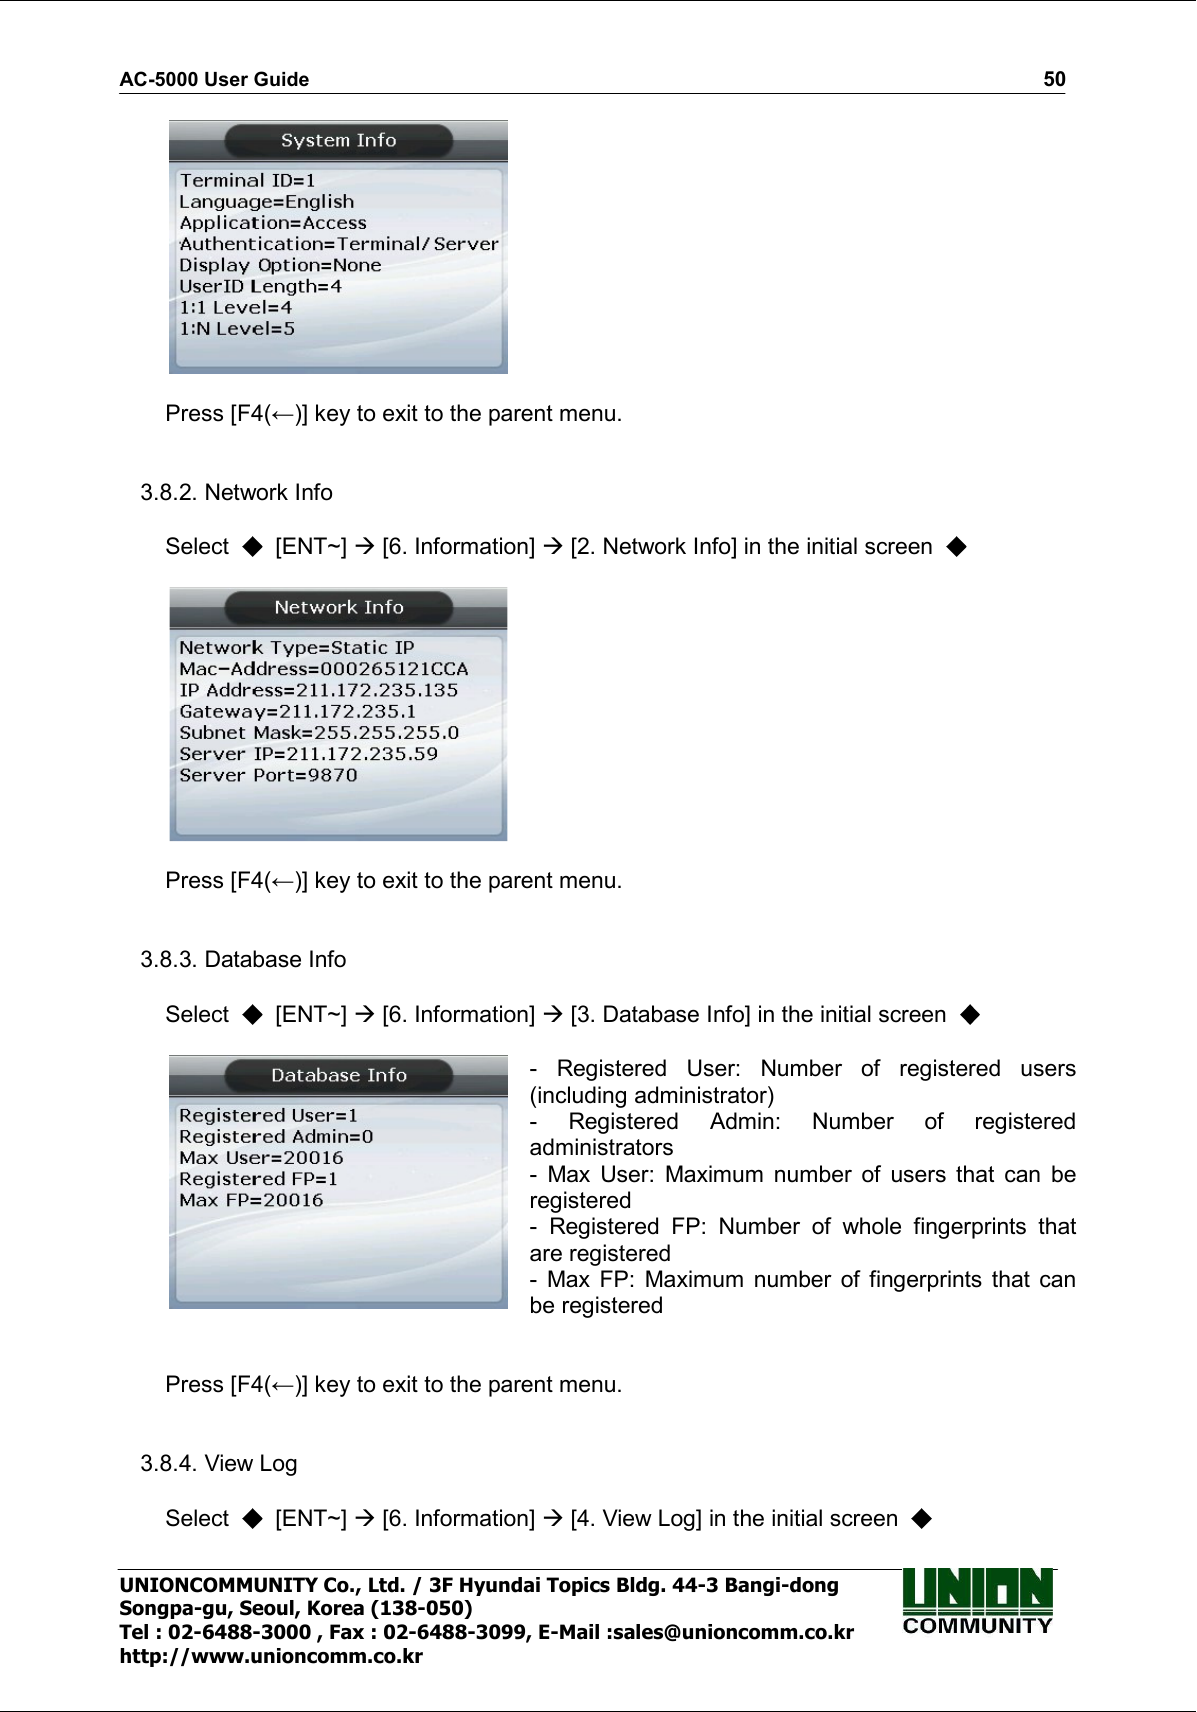 AC-5000 User Guide                                                                                                                                                   50 UNIONCOMMUNITY Co., Ltd. / 3F Hyundai Topics Bldg. 44-3 Bangi-dong Songpa-gu, Seoul, Korea (138-050) Tel : 02-6488-3000 , Fax : 02-6488-3099, E-Mail :sales@unioncomm.co.kr http://www.unioncomm.co.kr    Press [F4(←)] key to exit to the parent menu.   3.8.2. Network Info  Select    [ENT~]  [6. Information]  [2. Network Info] in the initial screen       Press [F4(←)] key to exit to the parent menu.   3.8.3. Database Info  Select    [ENT~]  [6. Information]  [3. Database Info] in the initial screen     -  Registered  User:  Number  of  registered  users (including administrator) -  Registered  Admin:  Number  of  registered administrators   -  Max  User:  Maximum  number  of  users  that  can  be registered -  Registered  FP:  Number  of  whole  fingerprints  that are registered -  Max  FP:  Maximum  number  of  fingerprints  that  can be registered   Press [F4(←)] key to exit to the parent menu.   3.8.4. View Log  Select    [ENT~]  [6. Information]  [4. View Log] in the initial screen   